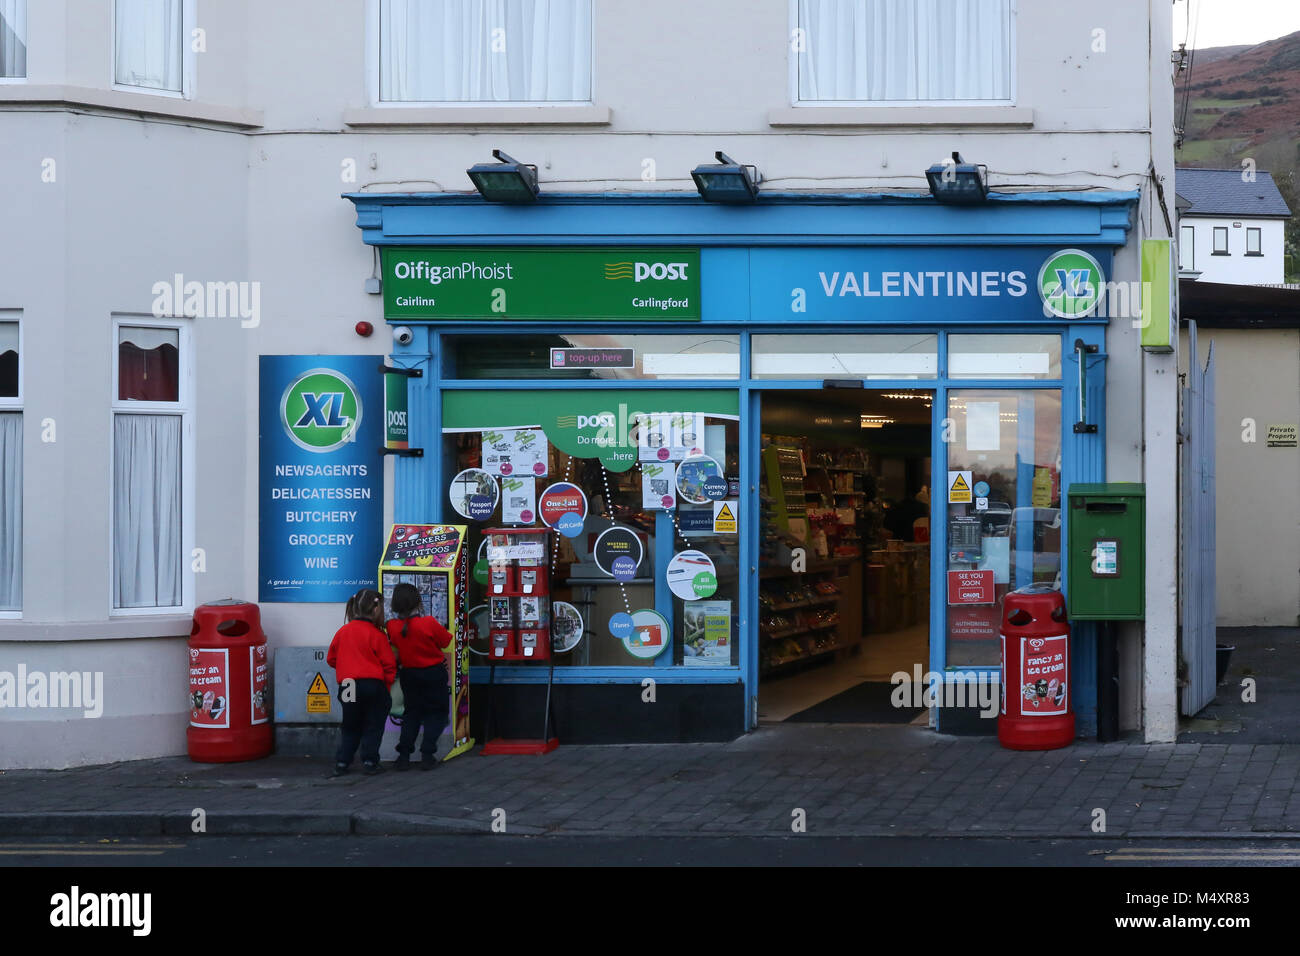 Children outside a supermarket and post office in rural Ireland. The XL brand supermarket is in Carlingford County Louth Ireland. Stock Photo